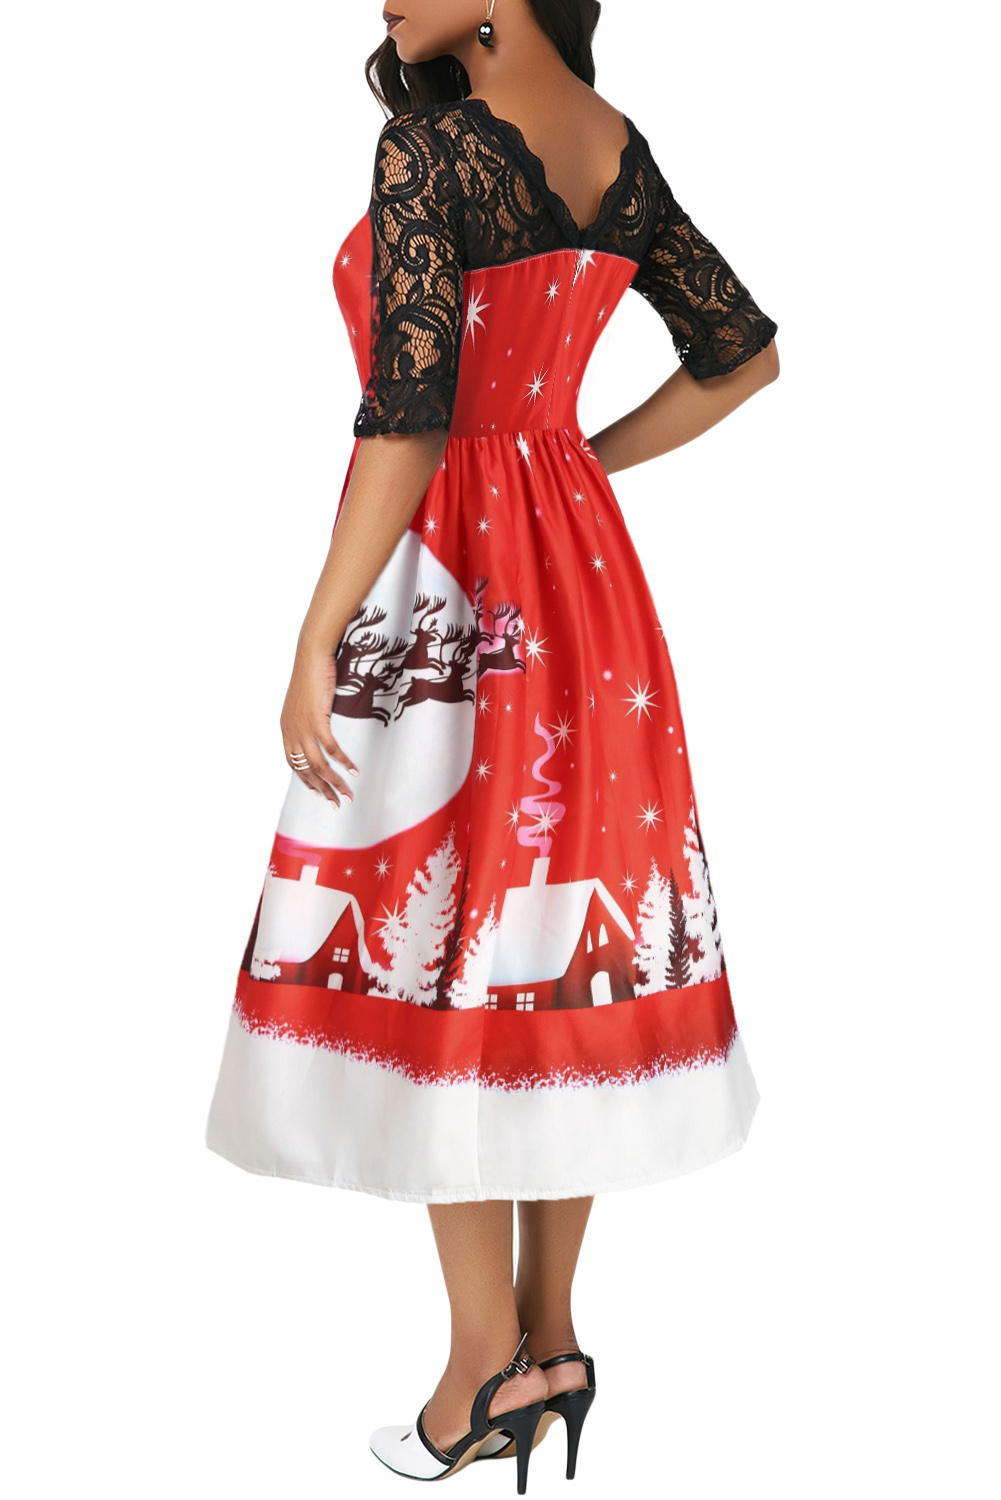 BY610920-1 JINGLE ALL THE THE WAY CHRISTMAS PRINT FLARED DRESS